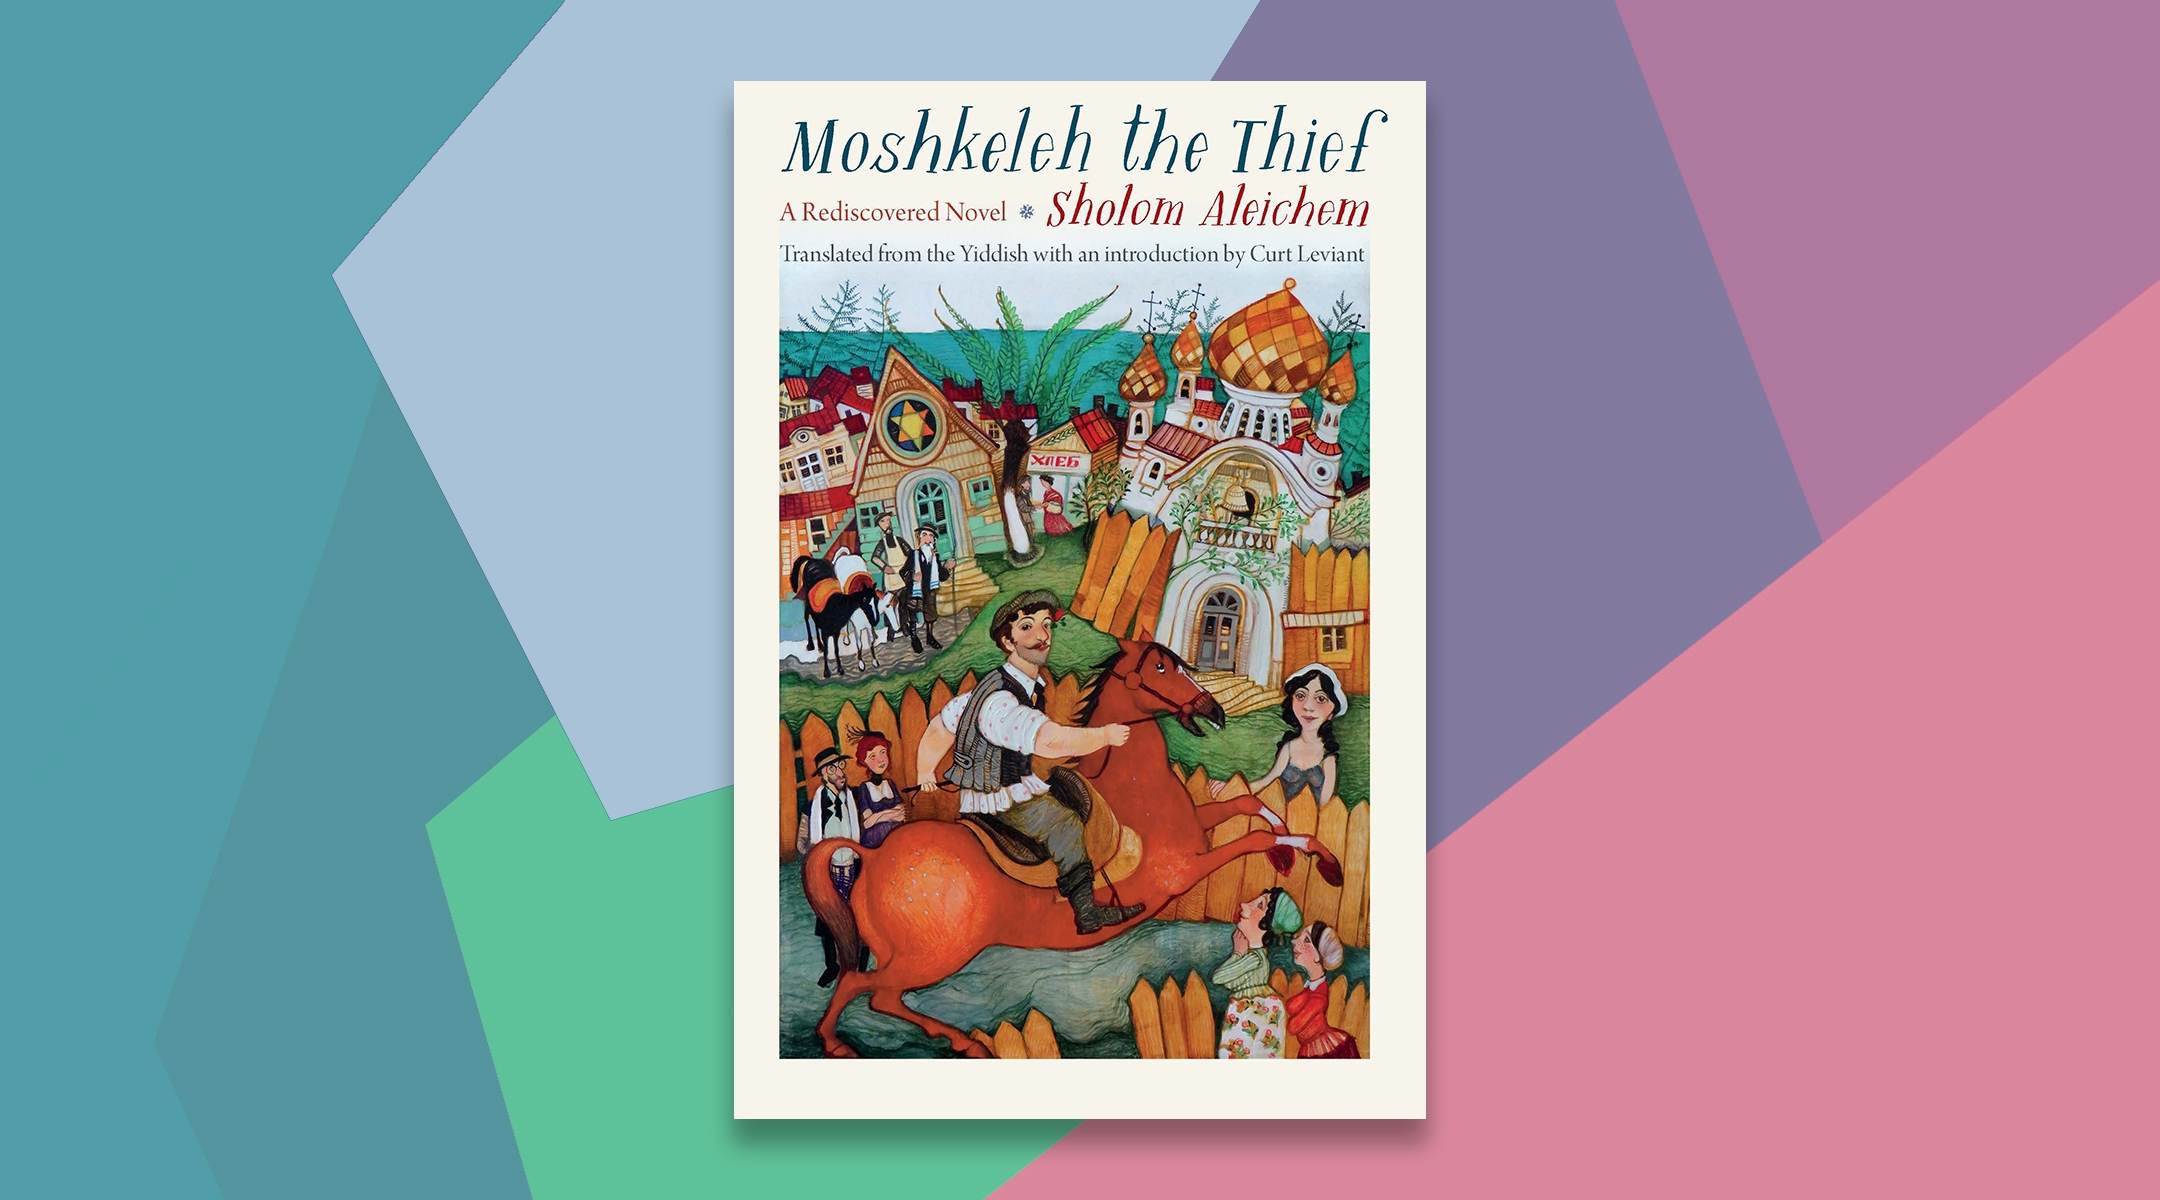 The cover of Curt Leviant's translation of "Moshkeleh the Thief."